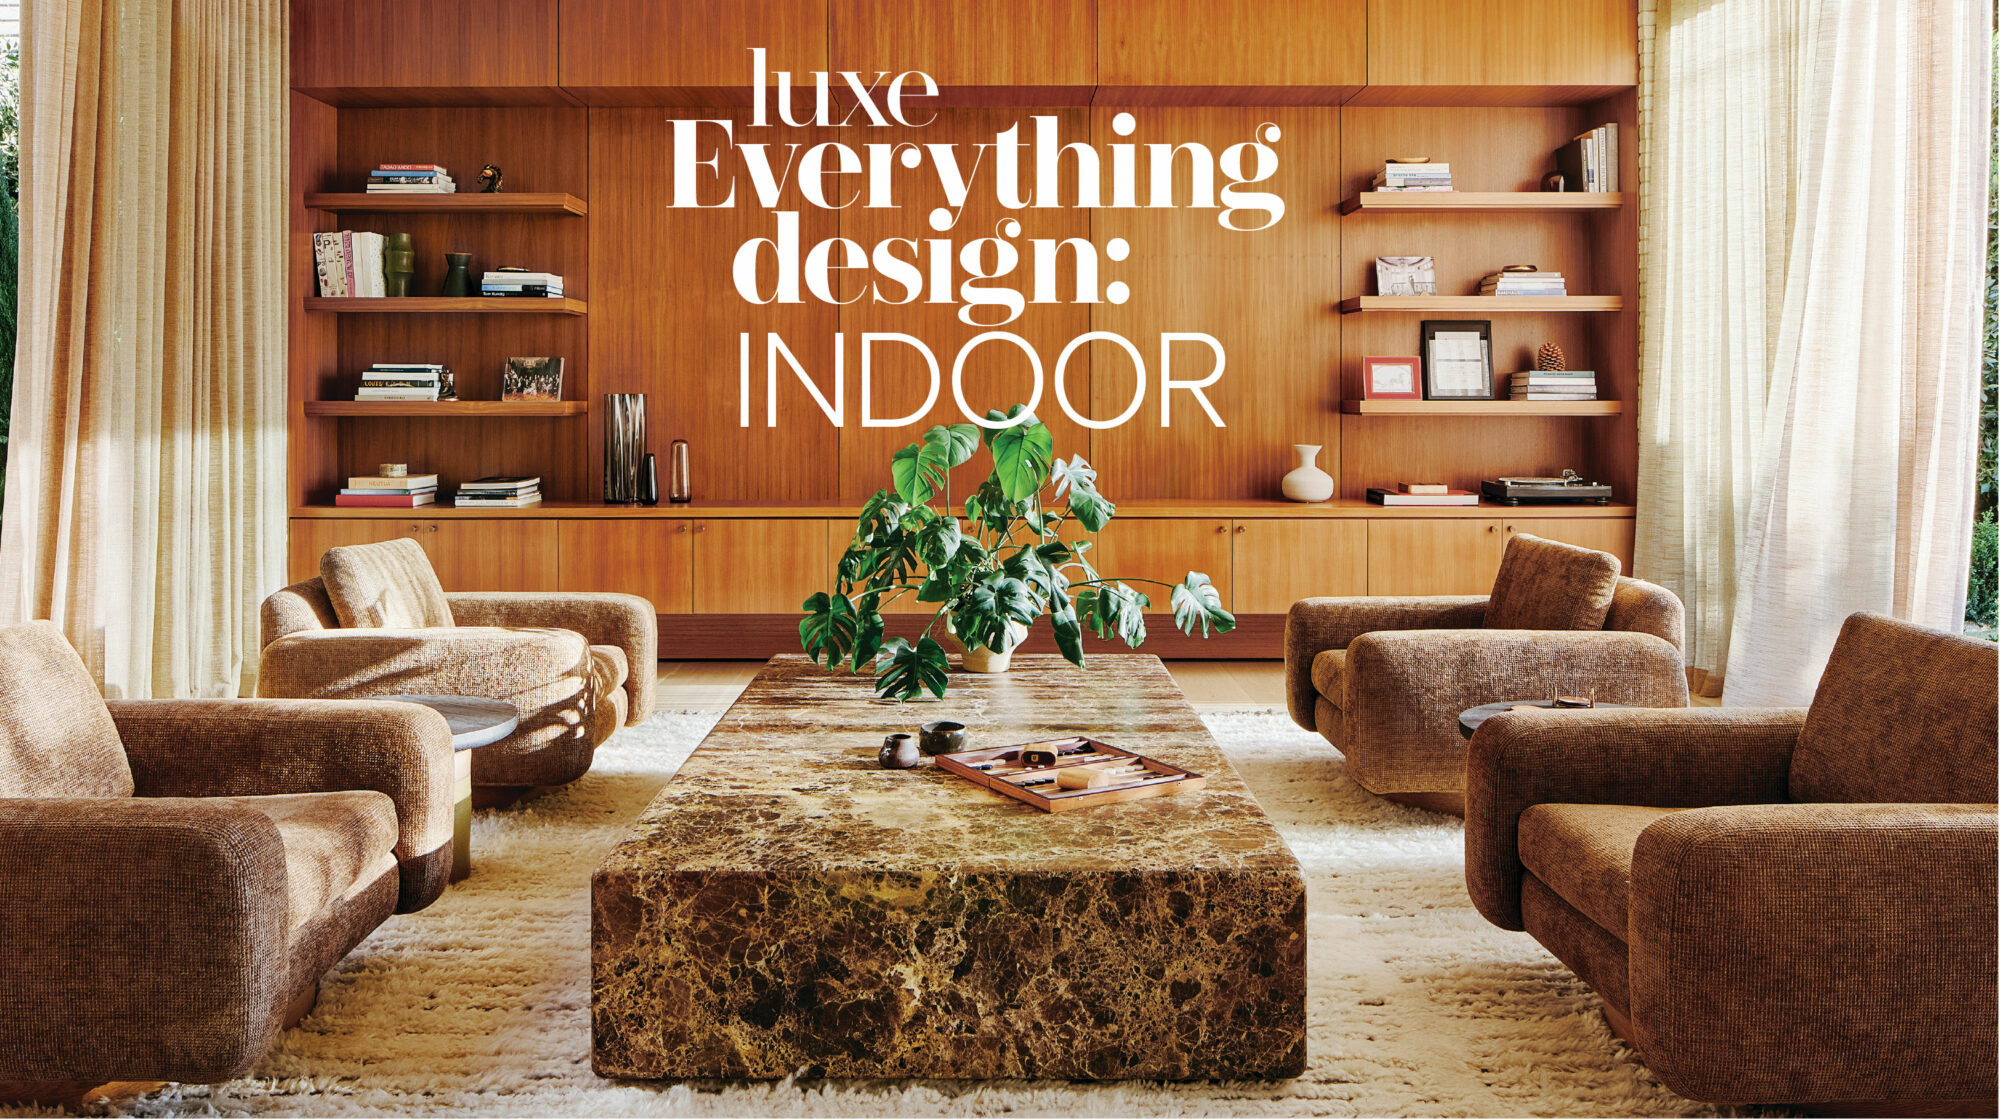 EverythingDesign Indoor 2022 LuxesourceHomepage Scaled 